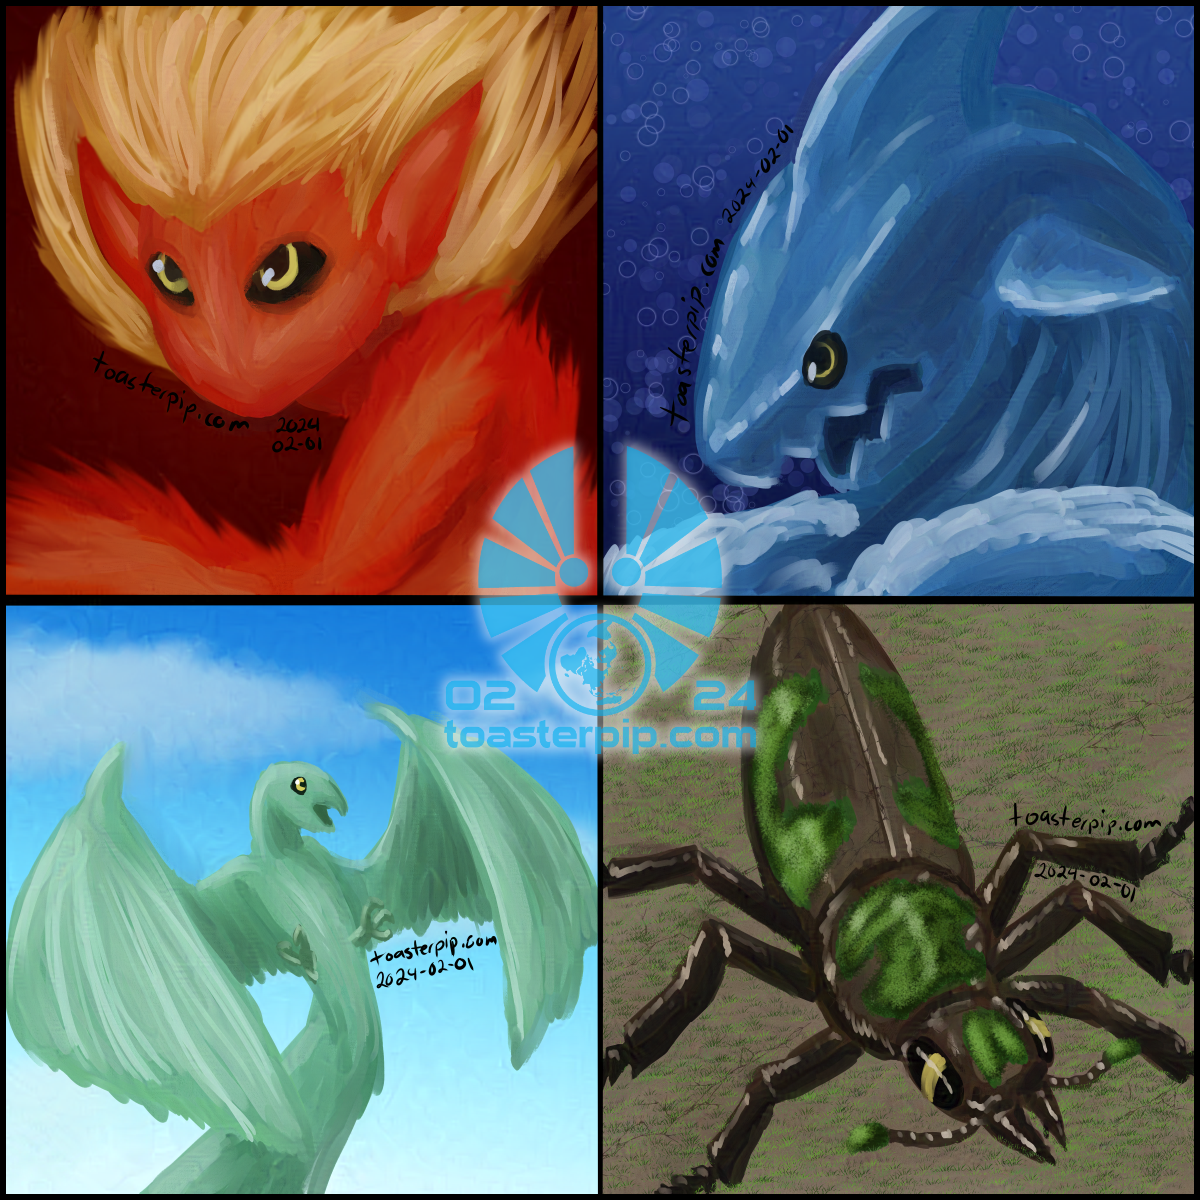 toasterpip A group of four portraits for use as virtual tabletop tokens. They depict the elemental forms of the changeling druid, Kopio. All have the same black eyes with yellow sclerae. In the top left, a vaguely humanoid fire elemental with bright yellow hair flowing back around long pointed ears; their body is a darker red fire. They are posed to look over their shoulder towards the viewer, the close arm partly raised. In the top right, a water elemental that looks much like a shark leaping up from the surface and curling forward to dive back down. The bottom left depicts an air elemental made of green energy and shaped like a mix between a wyvern and a parrot-like bird, set against a sky with clouds. The bottom right depicts an earth elemental in the shape of a large burying beetle, its body mostly dark brown, but with markings made out of green moss.